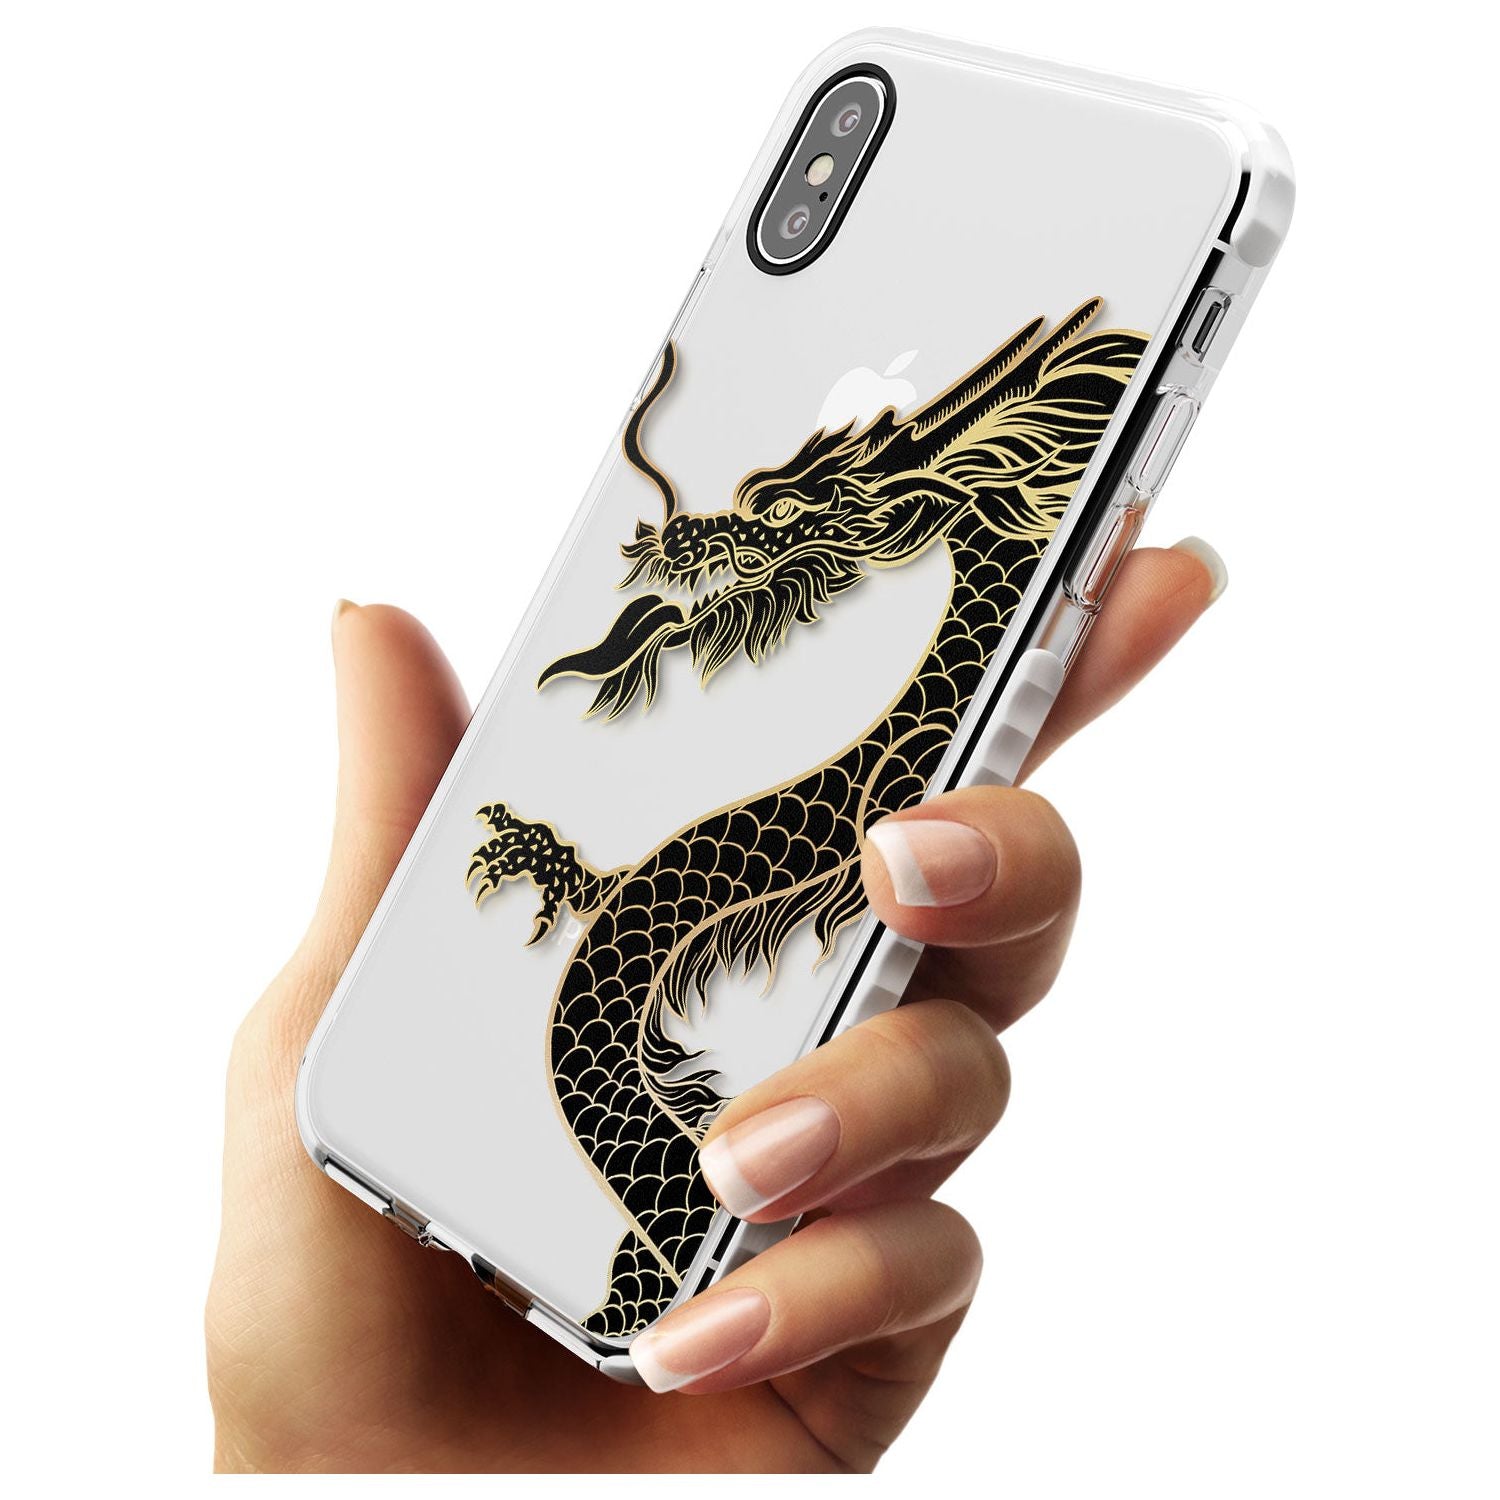 Large Red Dragon Impact Phone Case for iPhone X XS Max XR